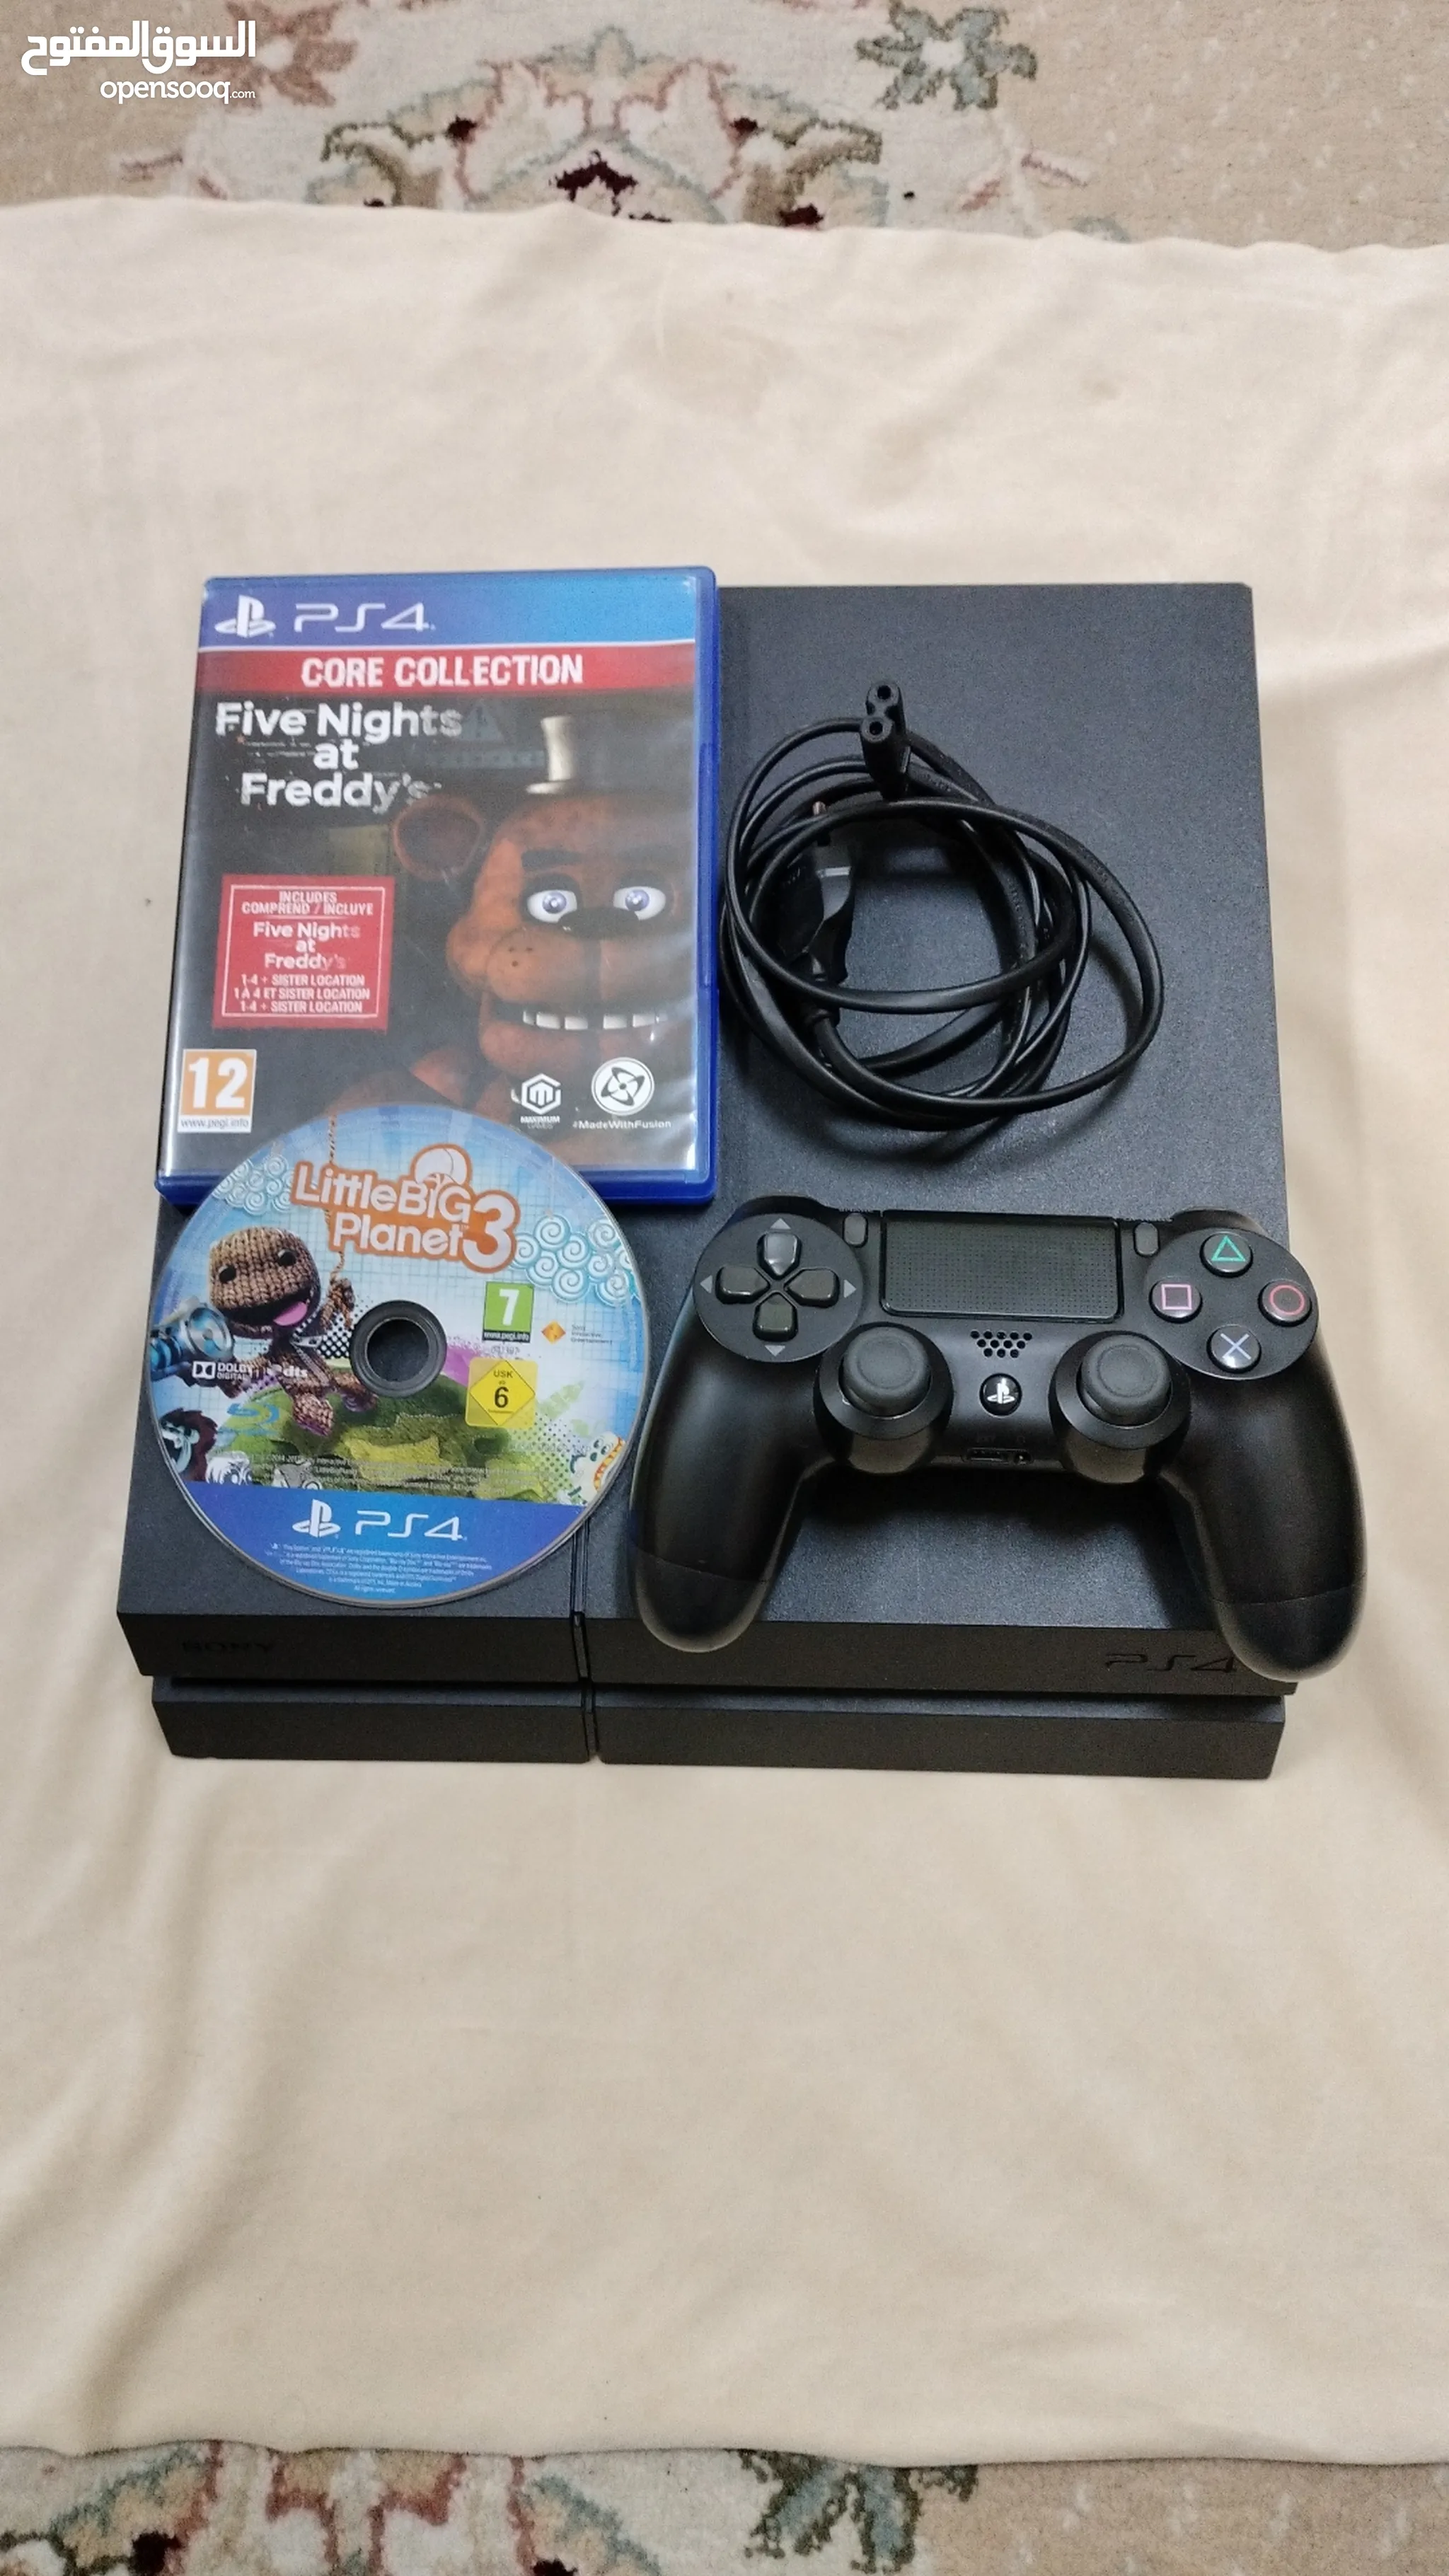 Playstation 4 For Sale in Kuwait : Used : Best Prices | OpenSooq